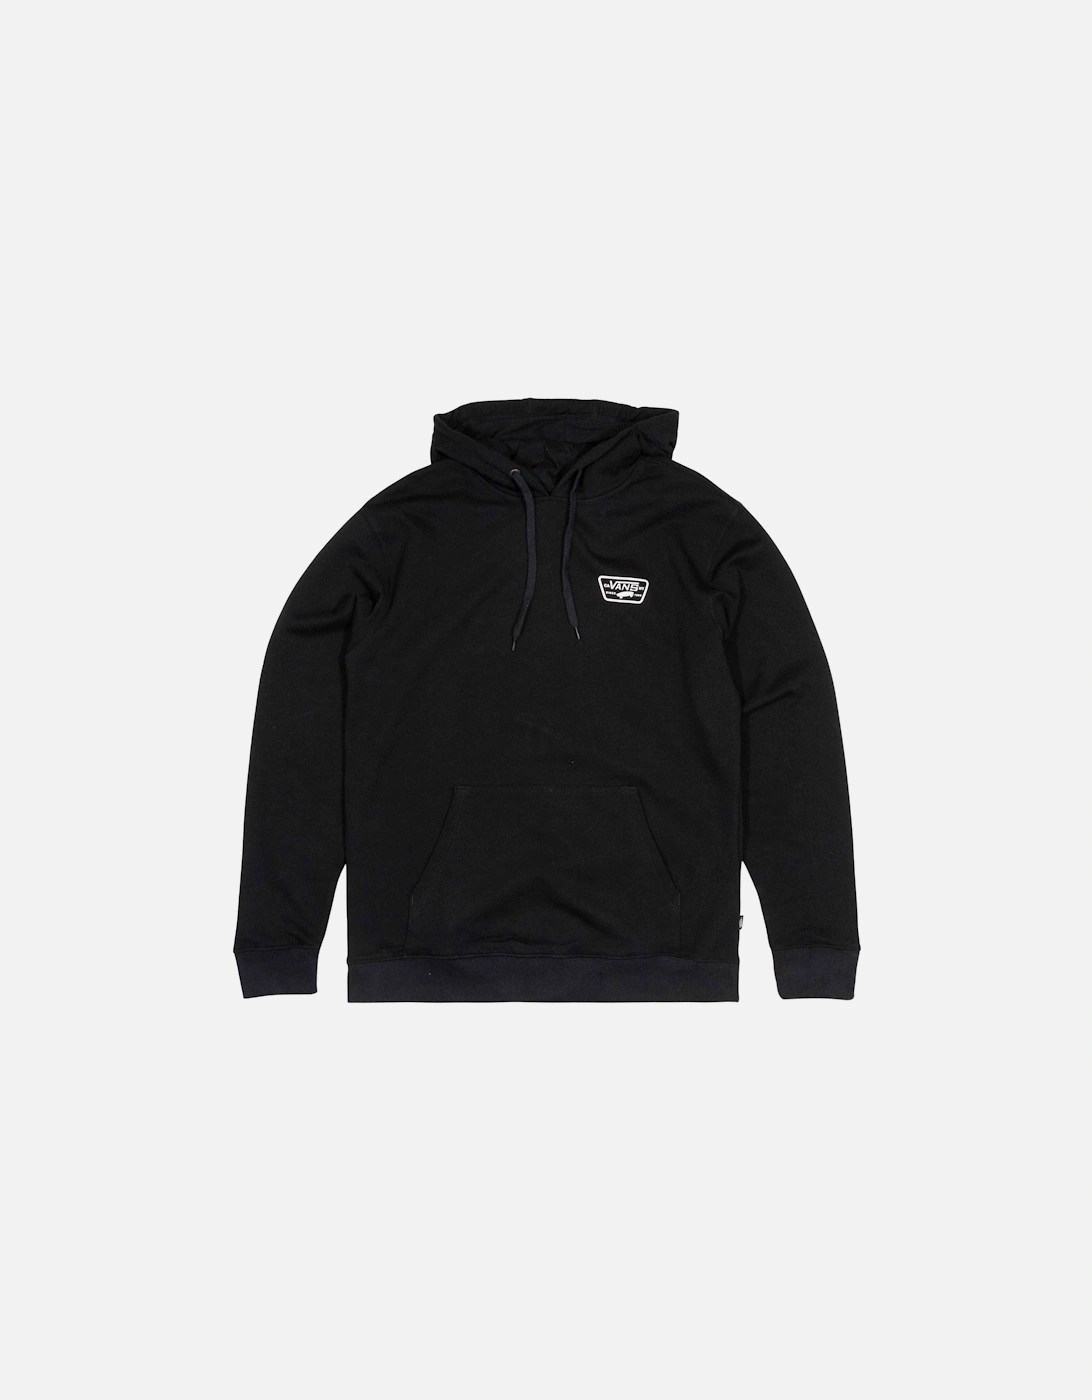 Full Patched Pullover Hooded Sweatshirt - Black